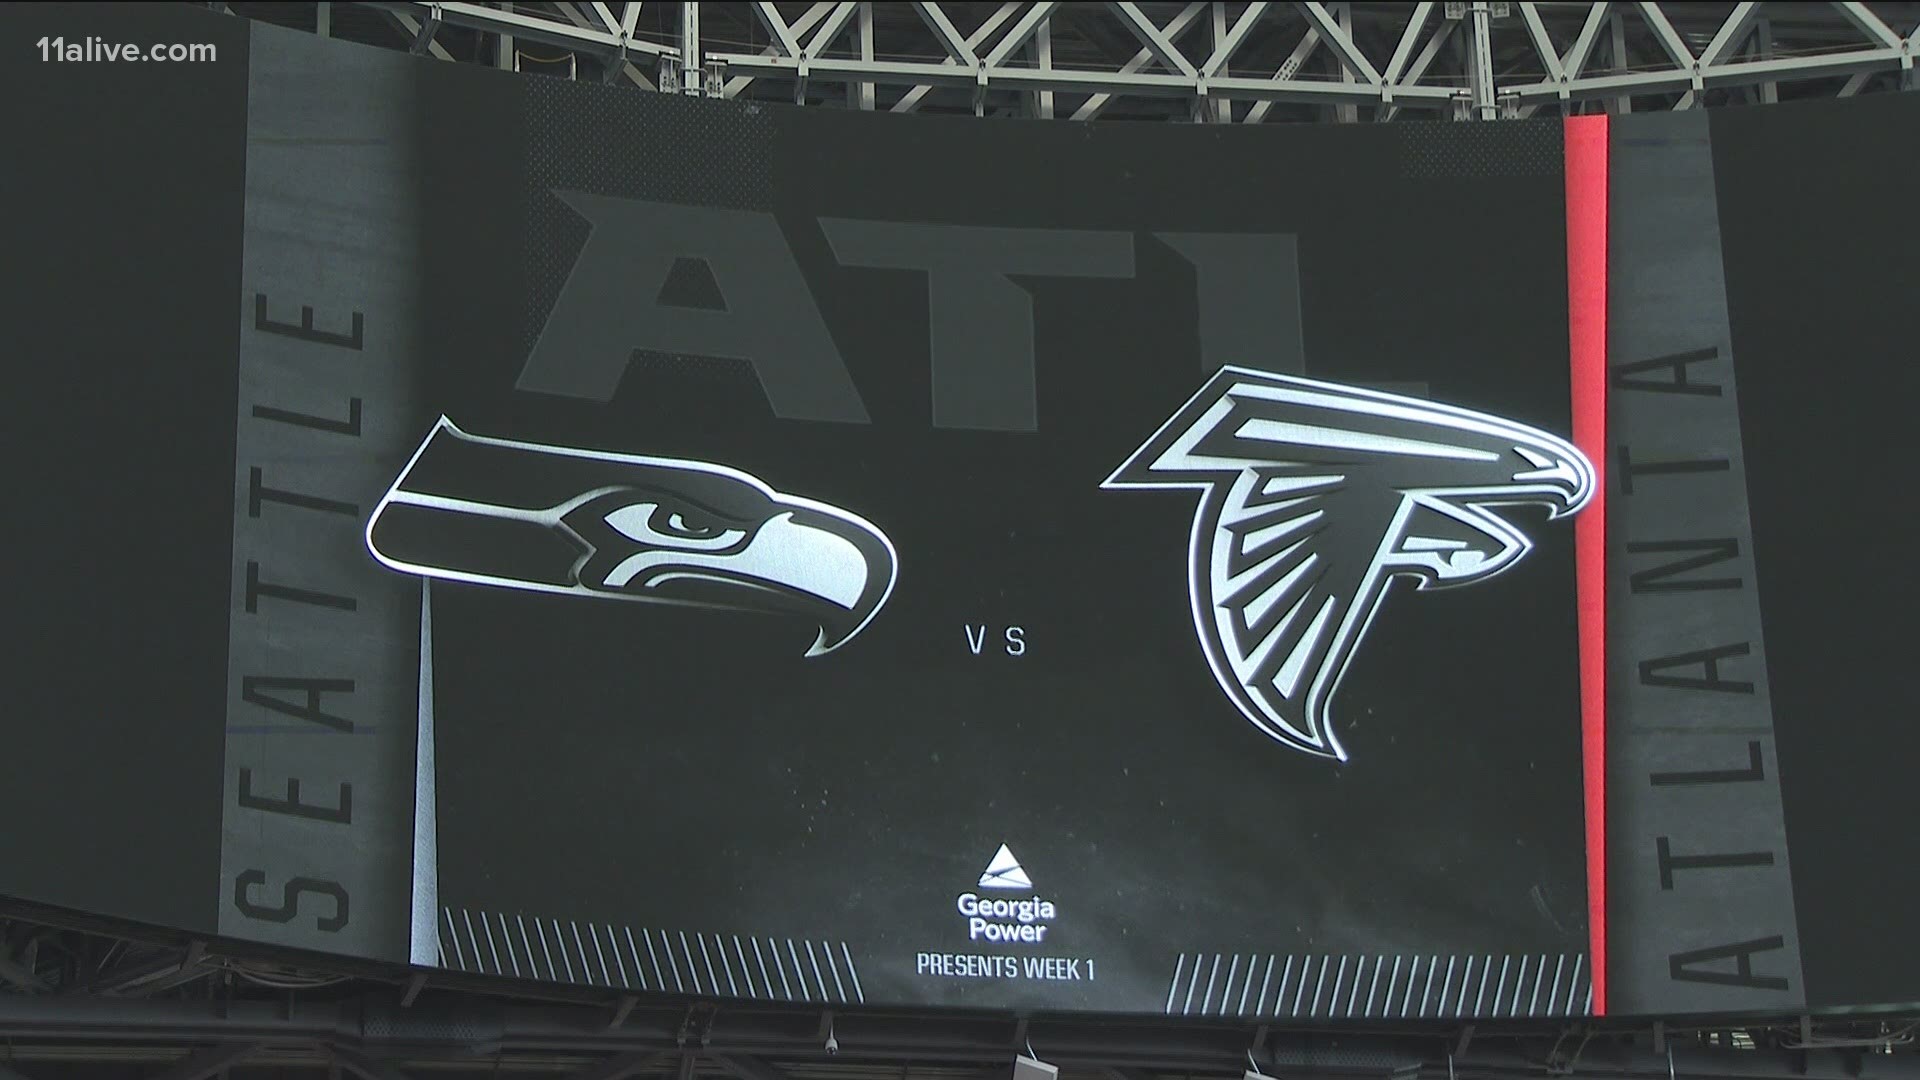 With no one being allowed in Mercedes-Benz Stadium during the upcoming game between the Seahawks and the Falcons, bars are expecting more customers.